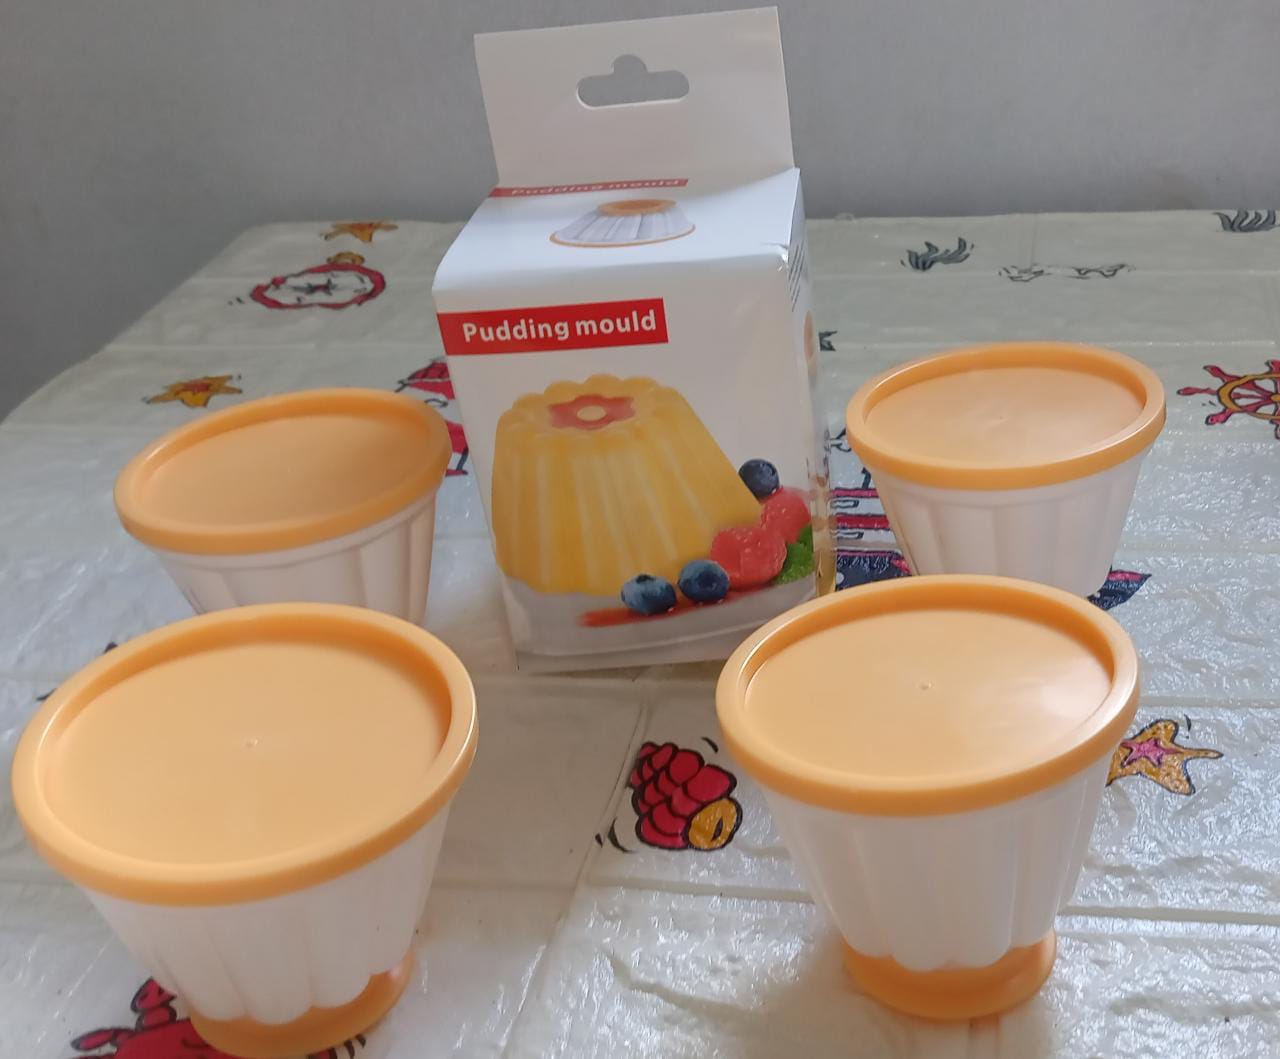 5971 Pudding Molds, Custard Mould, Mould for Jelly Ice creams, Set of 4 Cups with Lid